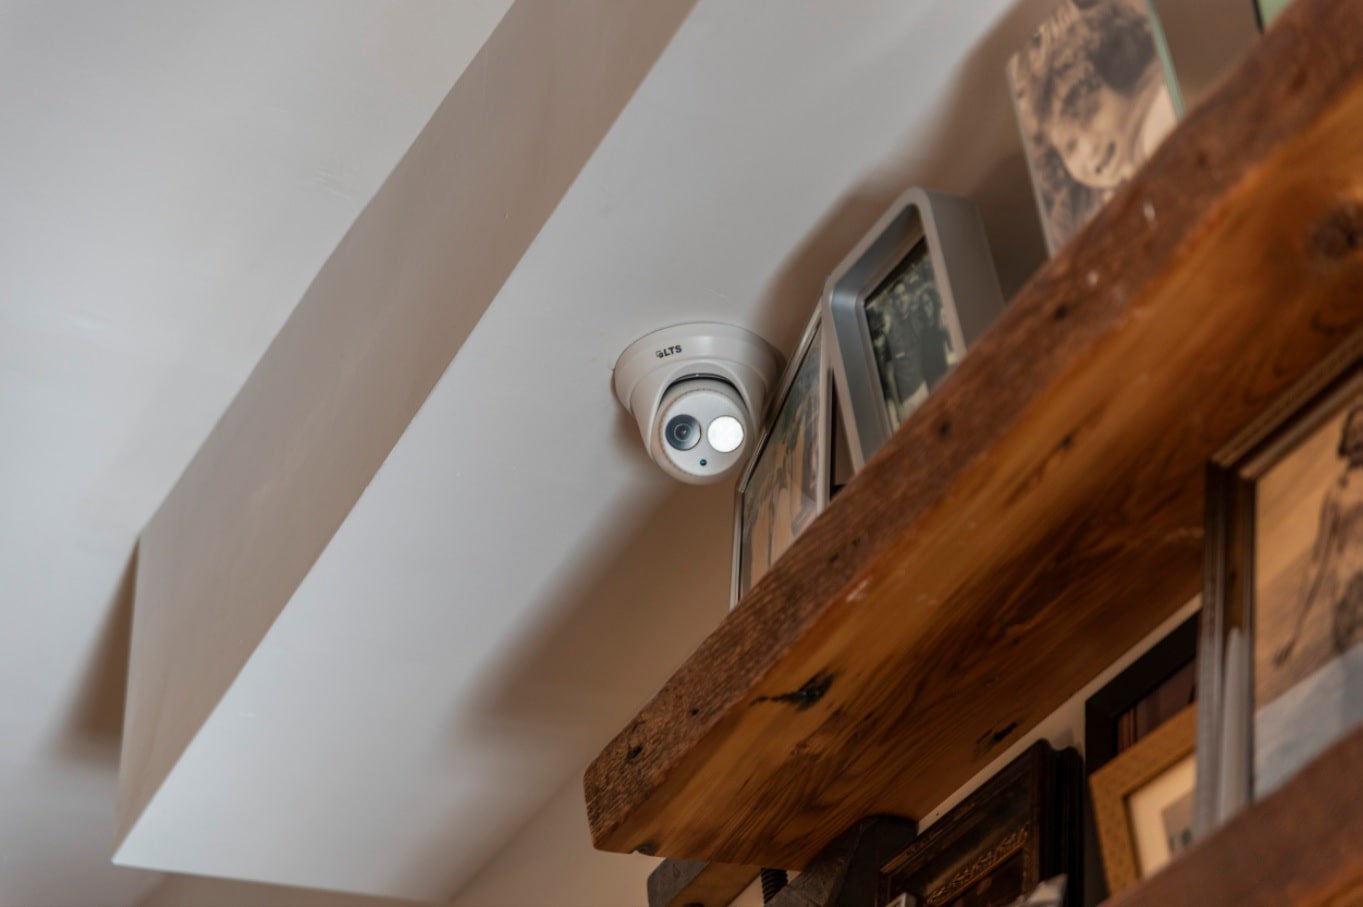 Modern Smart Home Design with Surveillance Cameras. Indoor camera at the book shelving